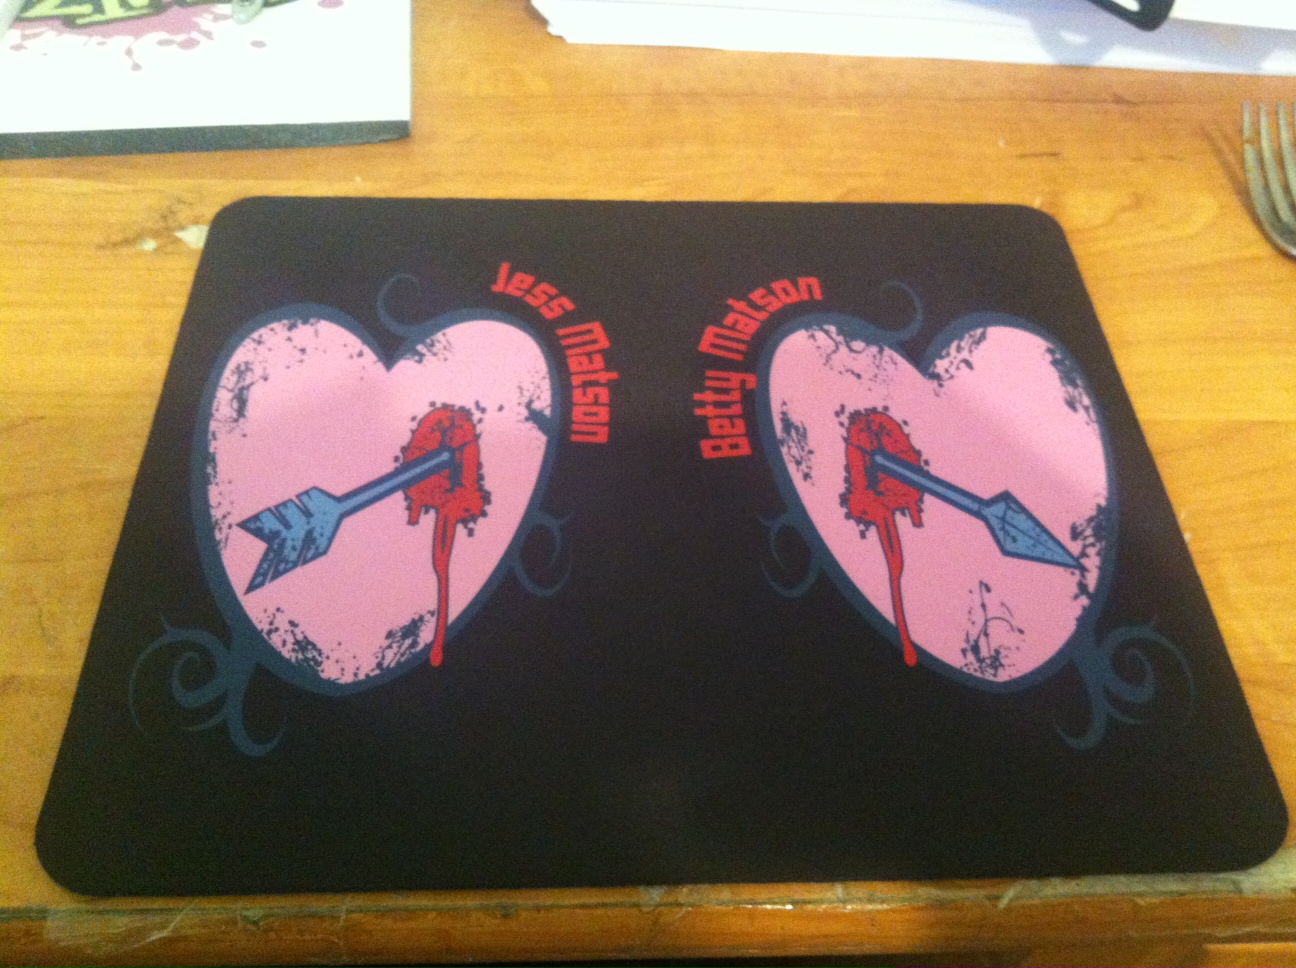 Lovers Mouse Pad made with sublimation printing